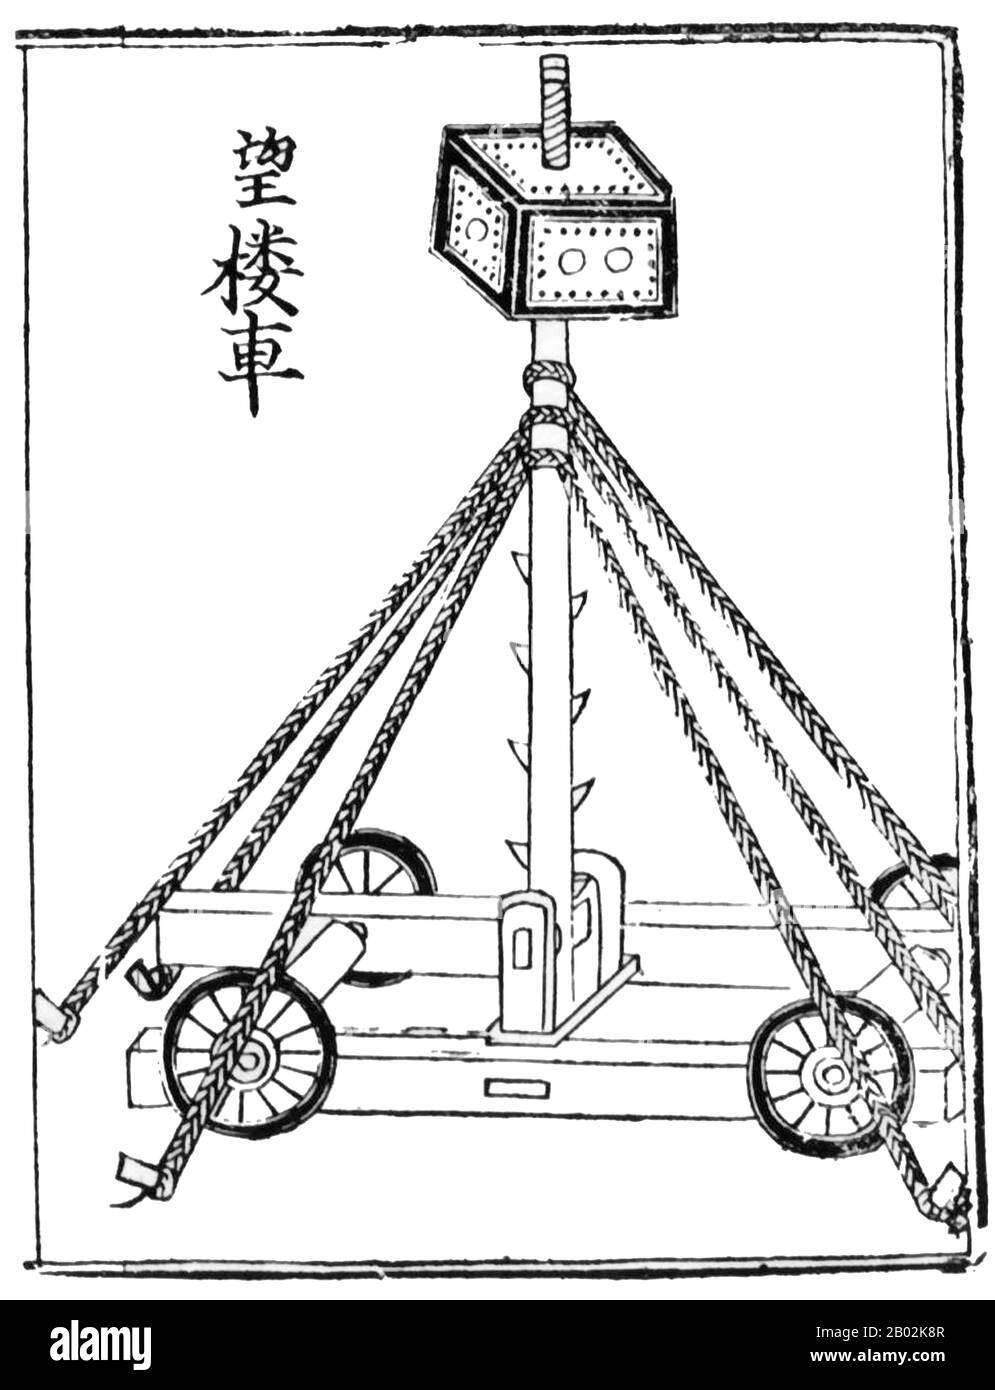 The Wujing Zongyao (simplified Chinese: 武经总要; traditional Chinese: 武經總要; pinyin: Wǔjīng Zǒngyào; Wade–Giles: Wu Ching Tsung Yao; literally: 'Collection of the Most Important Military Techniques') is a Chinese military compendium written in 1044 CE, during the Northern Song Dynasty.  Its authors were the prominent scholars Zeng Gongliang (曾公亮), Ding Du (丁度) and Yang Weide (楊惟德), whose writing influenced many later Chinese military writers. The book covered a wide range of subjects, everything from naval warships to different types of catapults.  Although the English philosopher and friar Roger Stock Photo